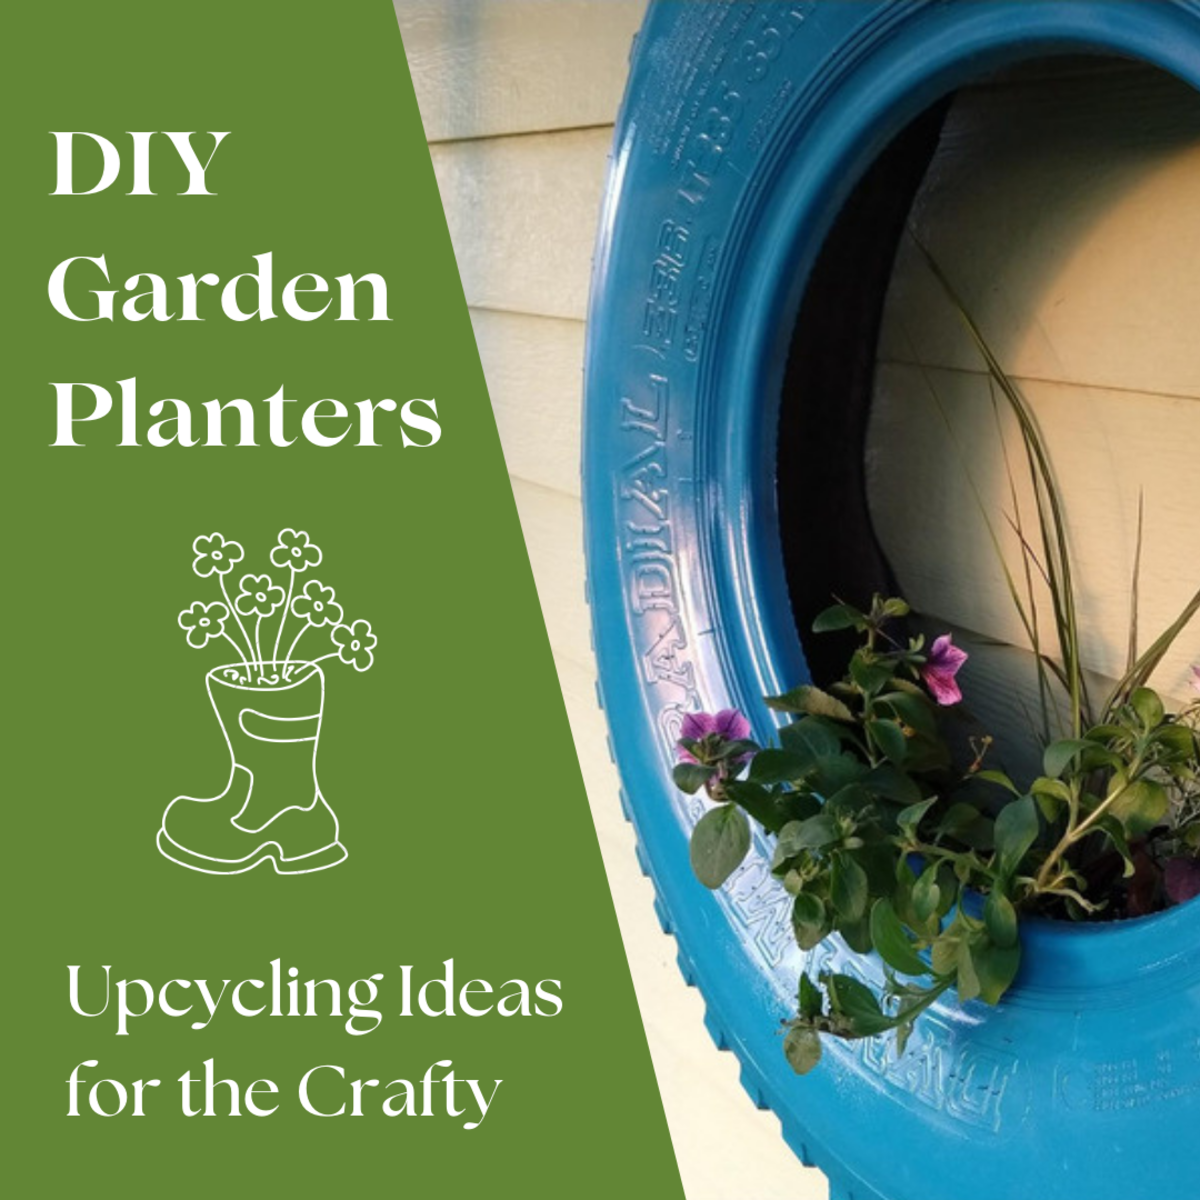 This article will share a wealth of ideas for repurposed old items to turn them into wonderful DIY garden planters.